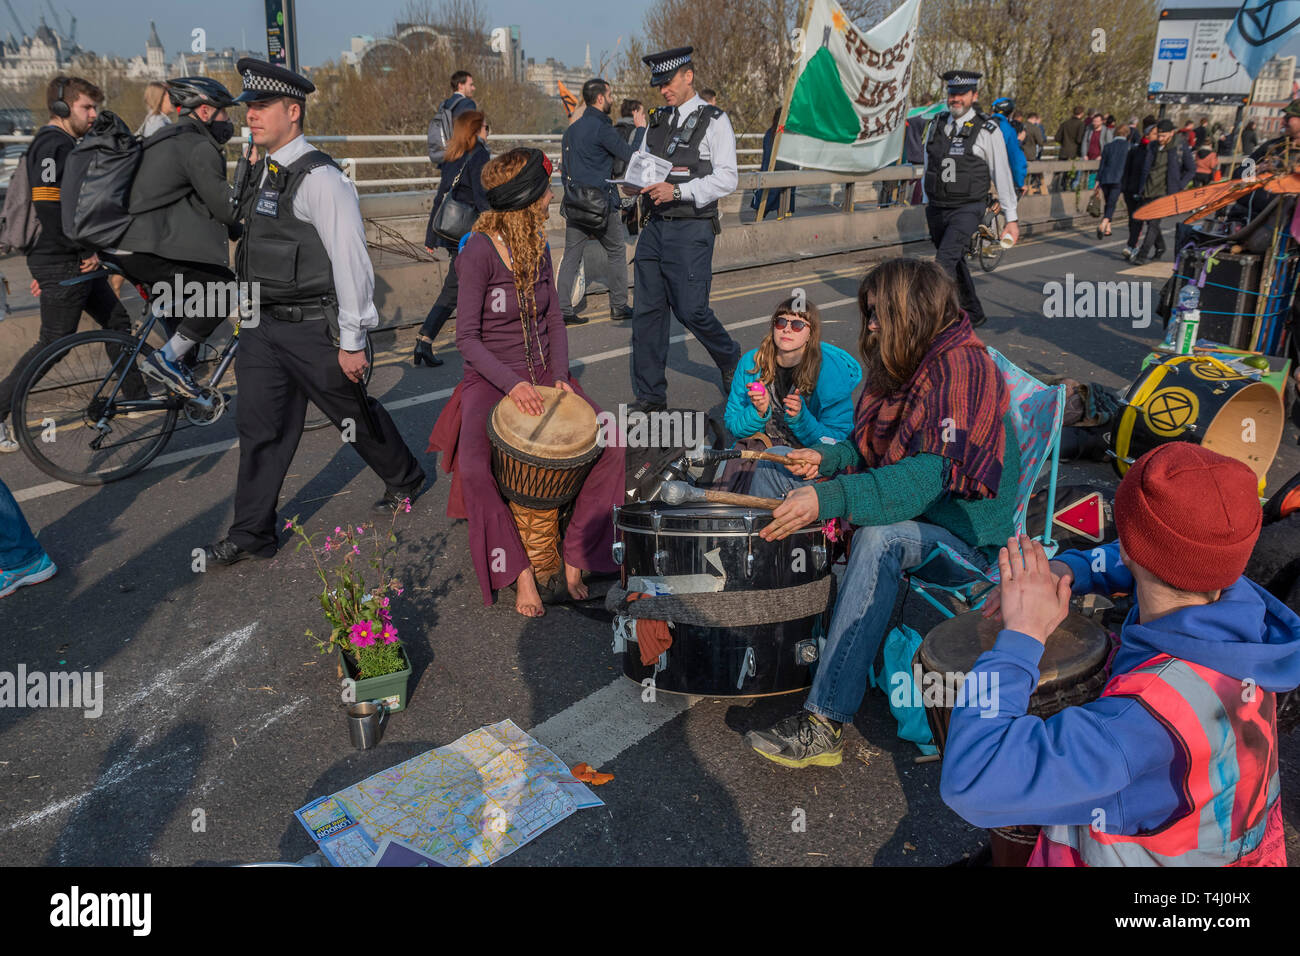 London, UK. 17th Apr 2019. Playing music to commuters and the police - Morning on Waterloo Bridge sees the camp awake and commuters make their progress on foot and bike across the river - Day 3 - Protestors from Extinction Rebellion block several junctions in London as part of their ongoing protest to demand action by the UK Government on the 'climate chrisis'. The action is part of an international co-ordinated protest. Credit: Guy Bell/Alamy Live News Stock Photo